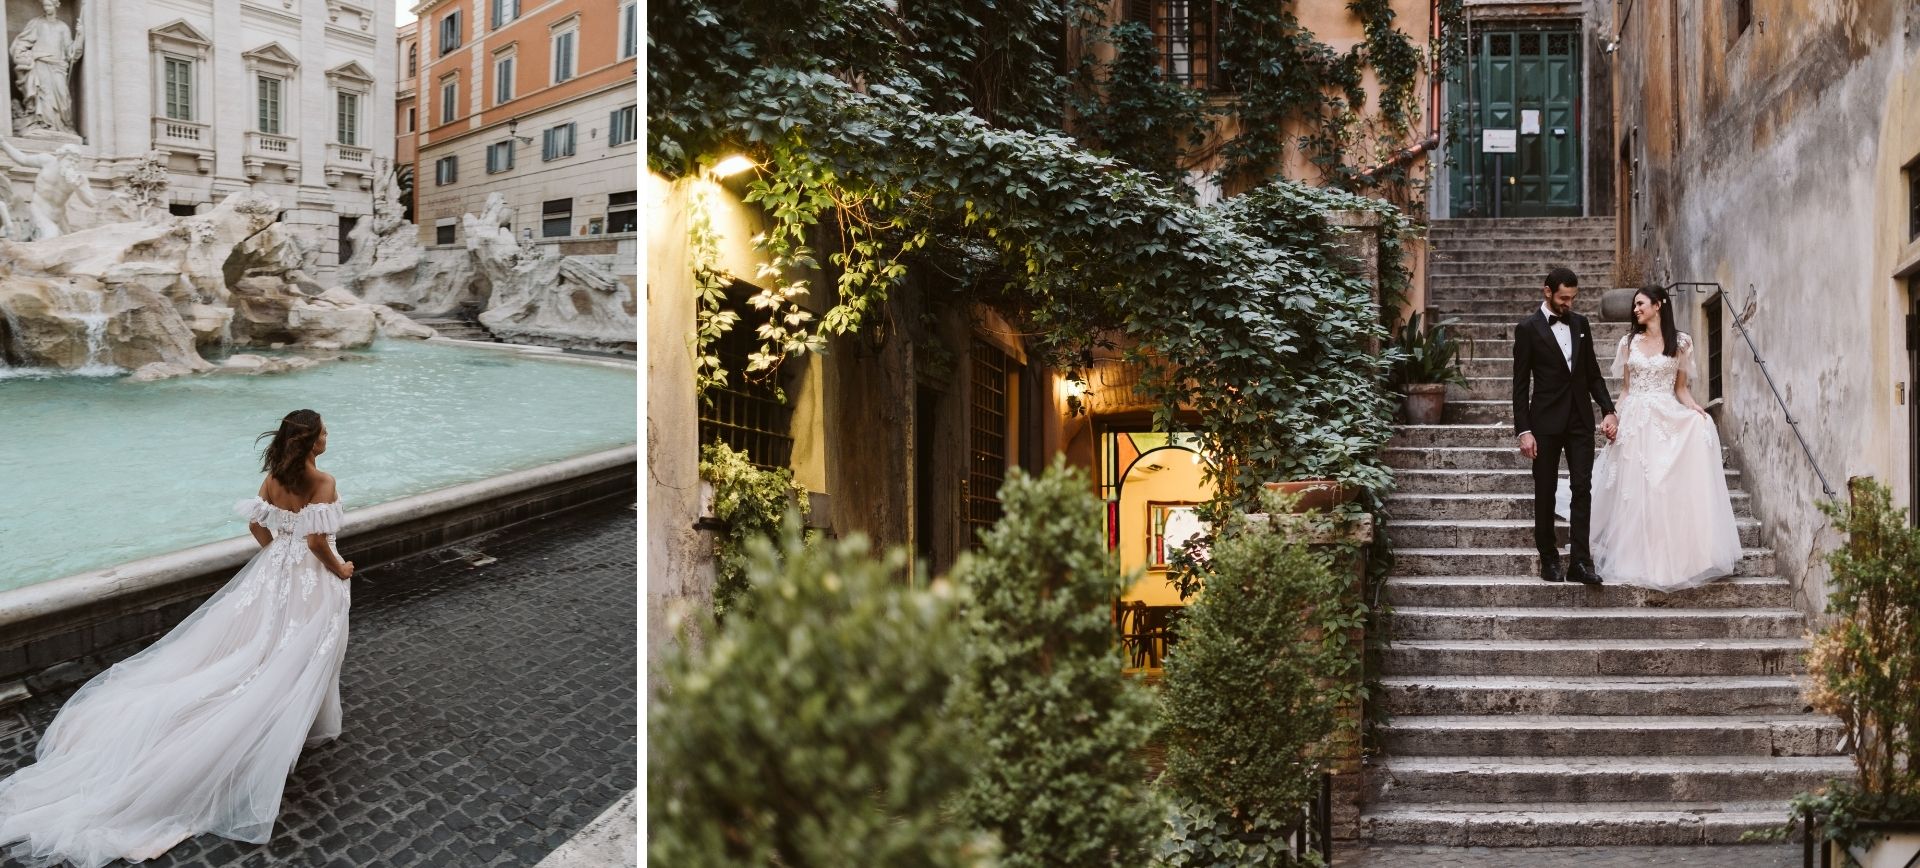 Rome elopement package - bride and groom during their italy elopement